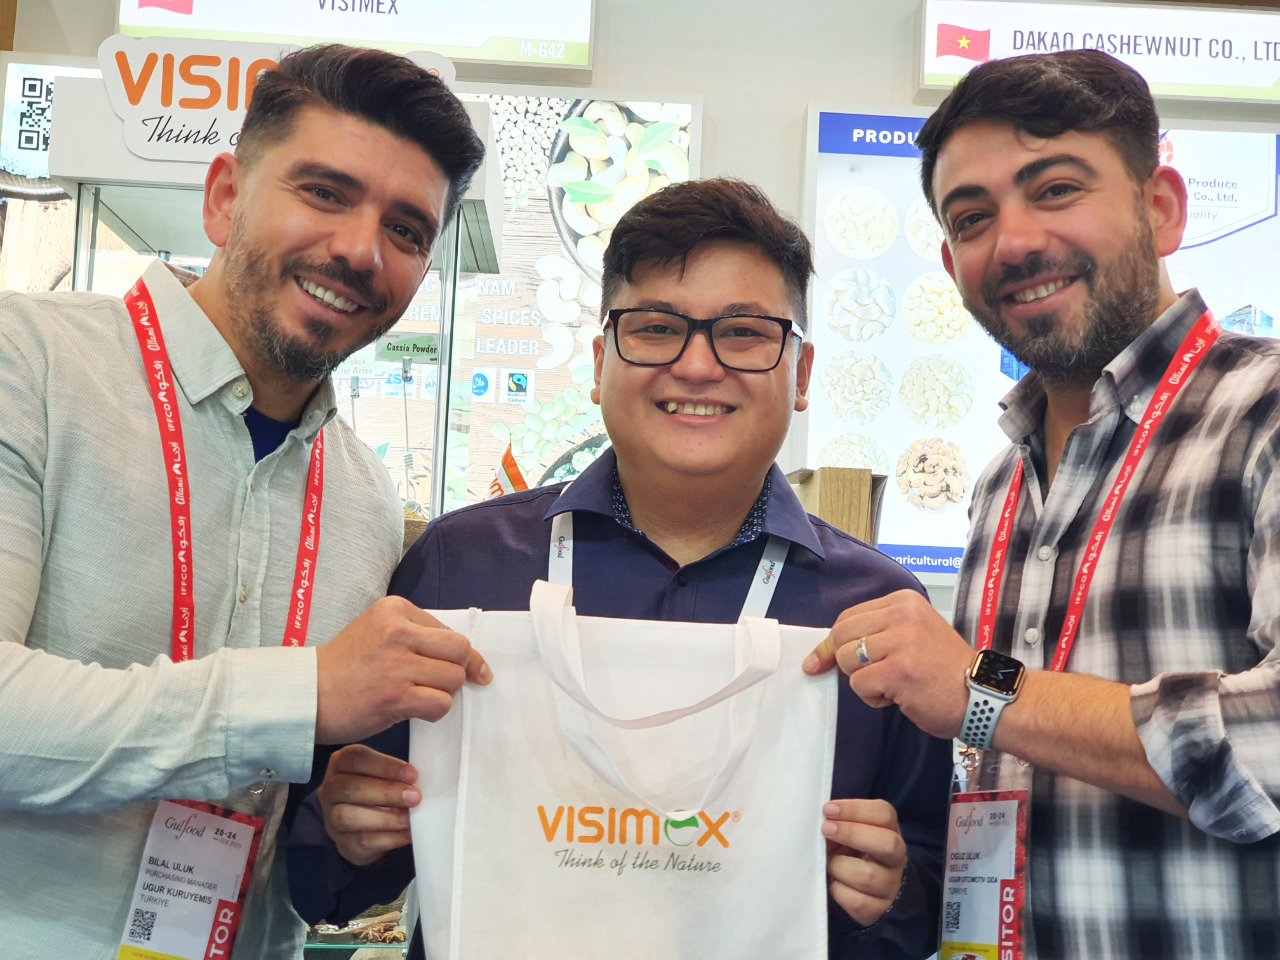 Visimex, the Pioneer of Sustainable Agriculture in Vietnam